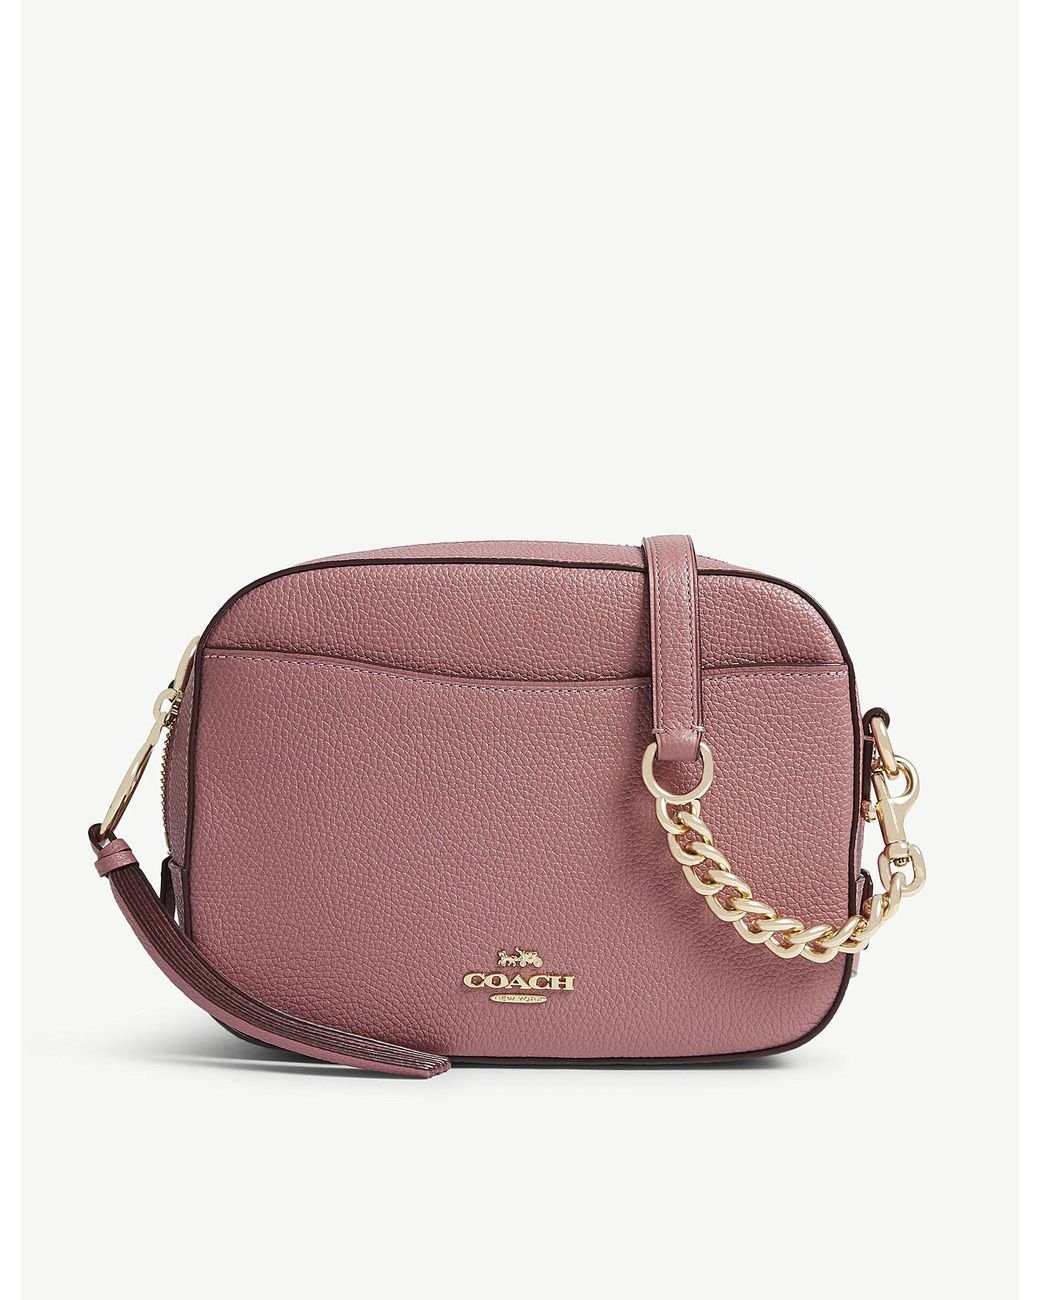 COACH Rose Pink Leather Camera Bag | Lyst